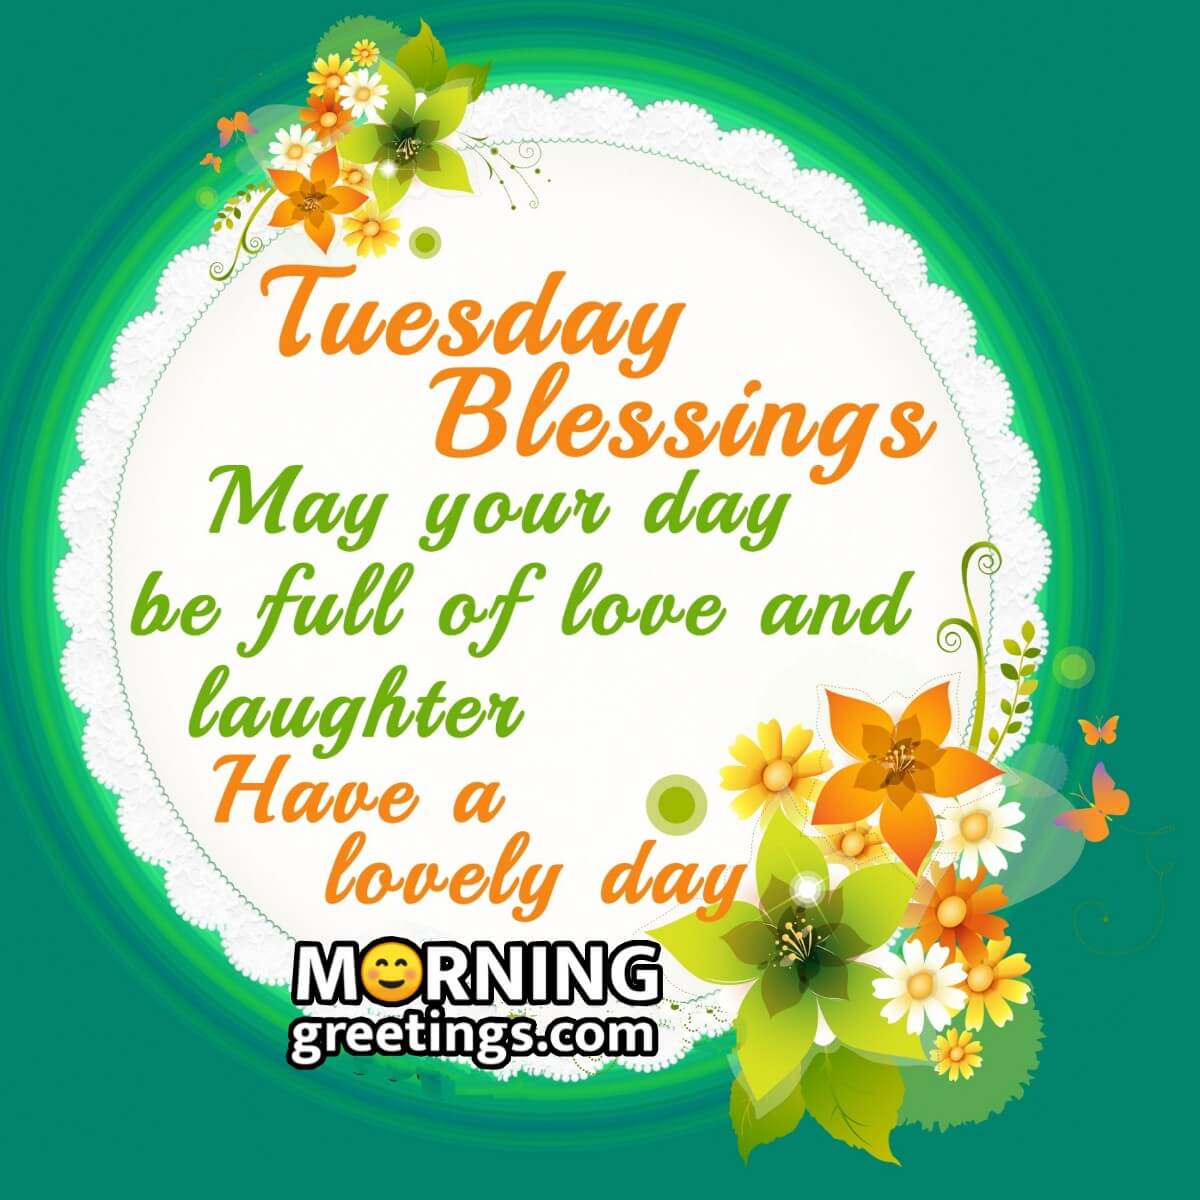 Tuesday Blessings Have A Lovely Day